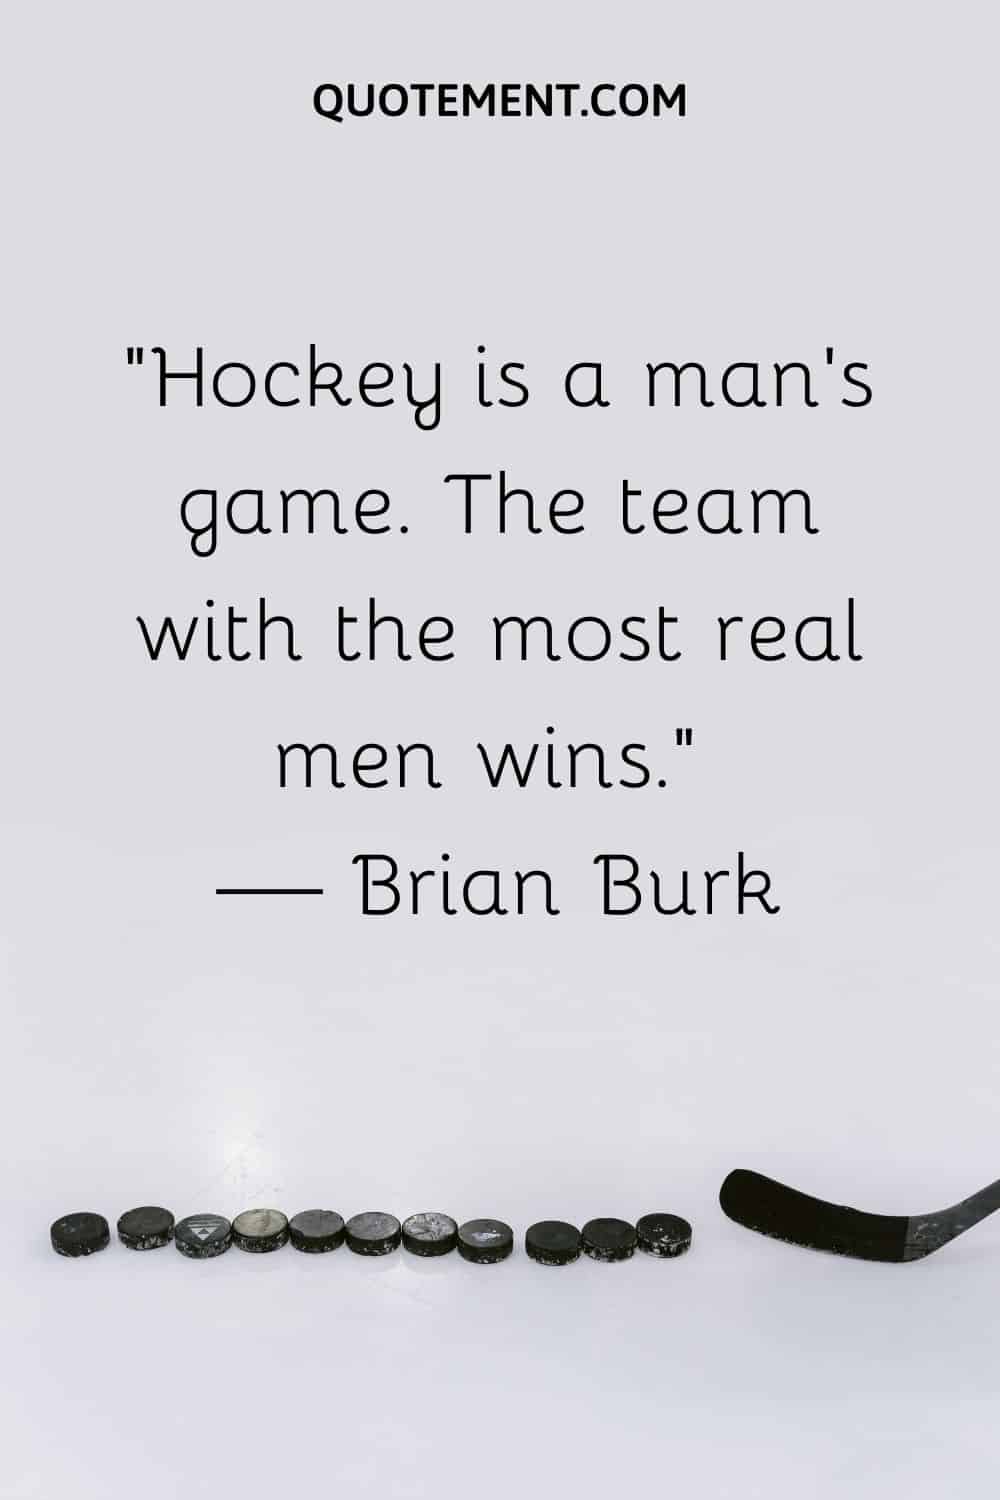 “Hockey is a man’s game. The team with the most real men wins.” — Brian Burk